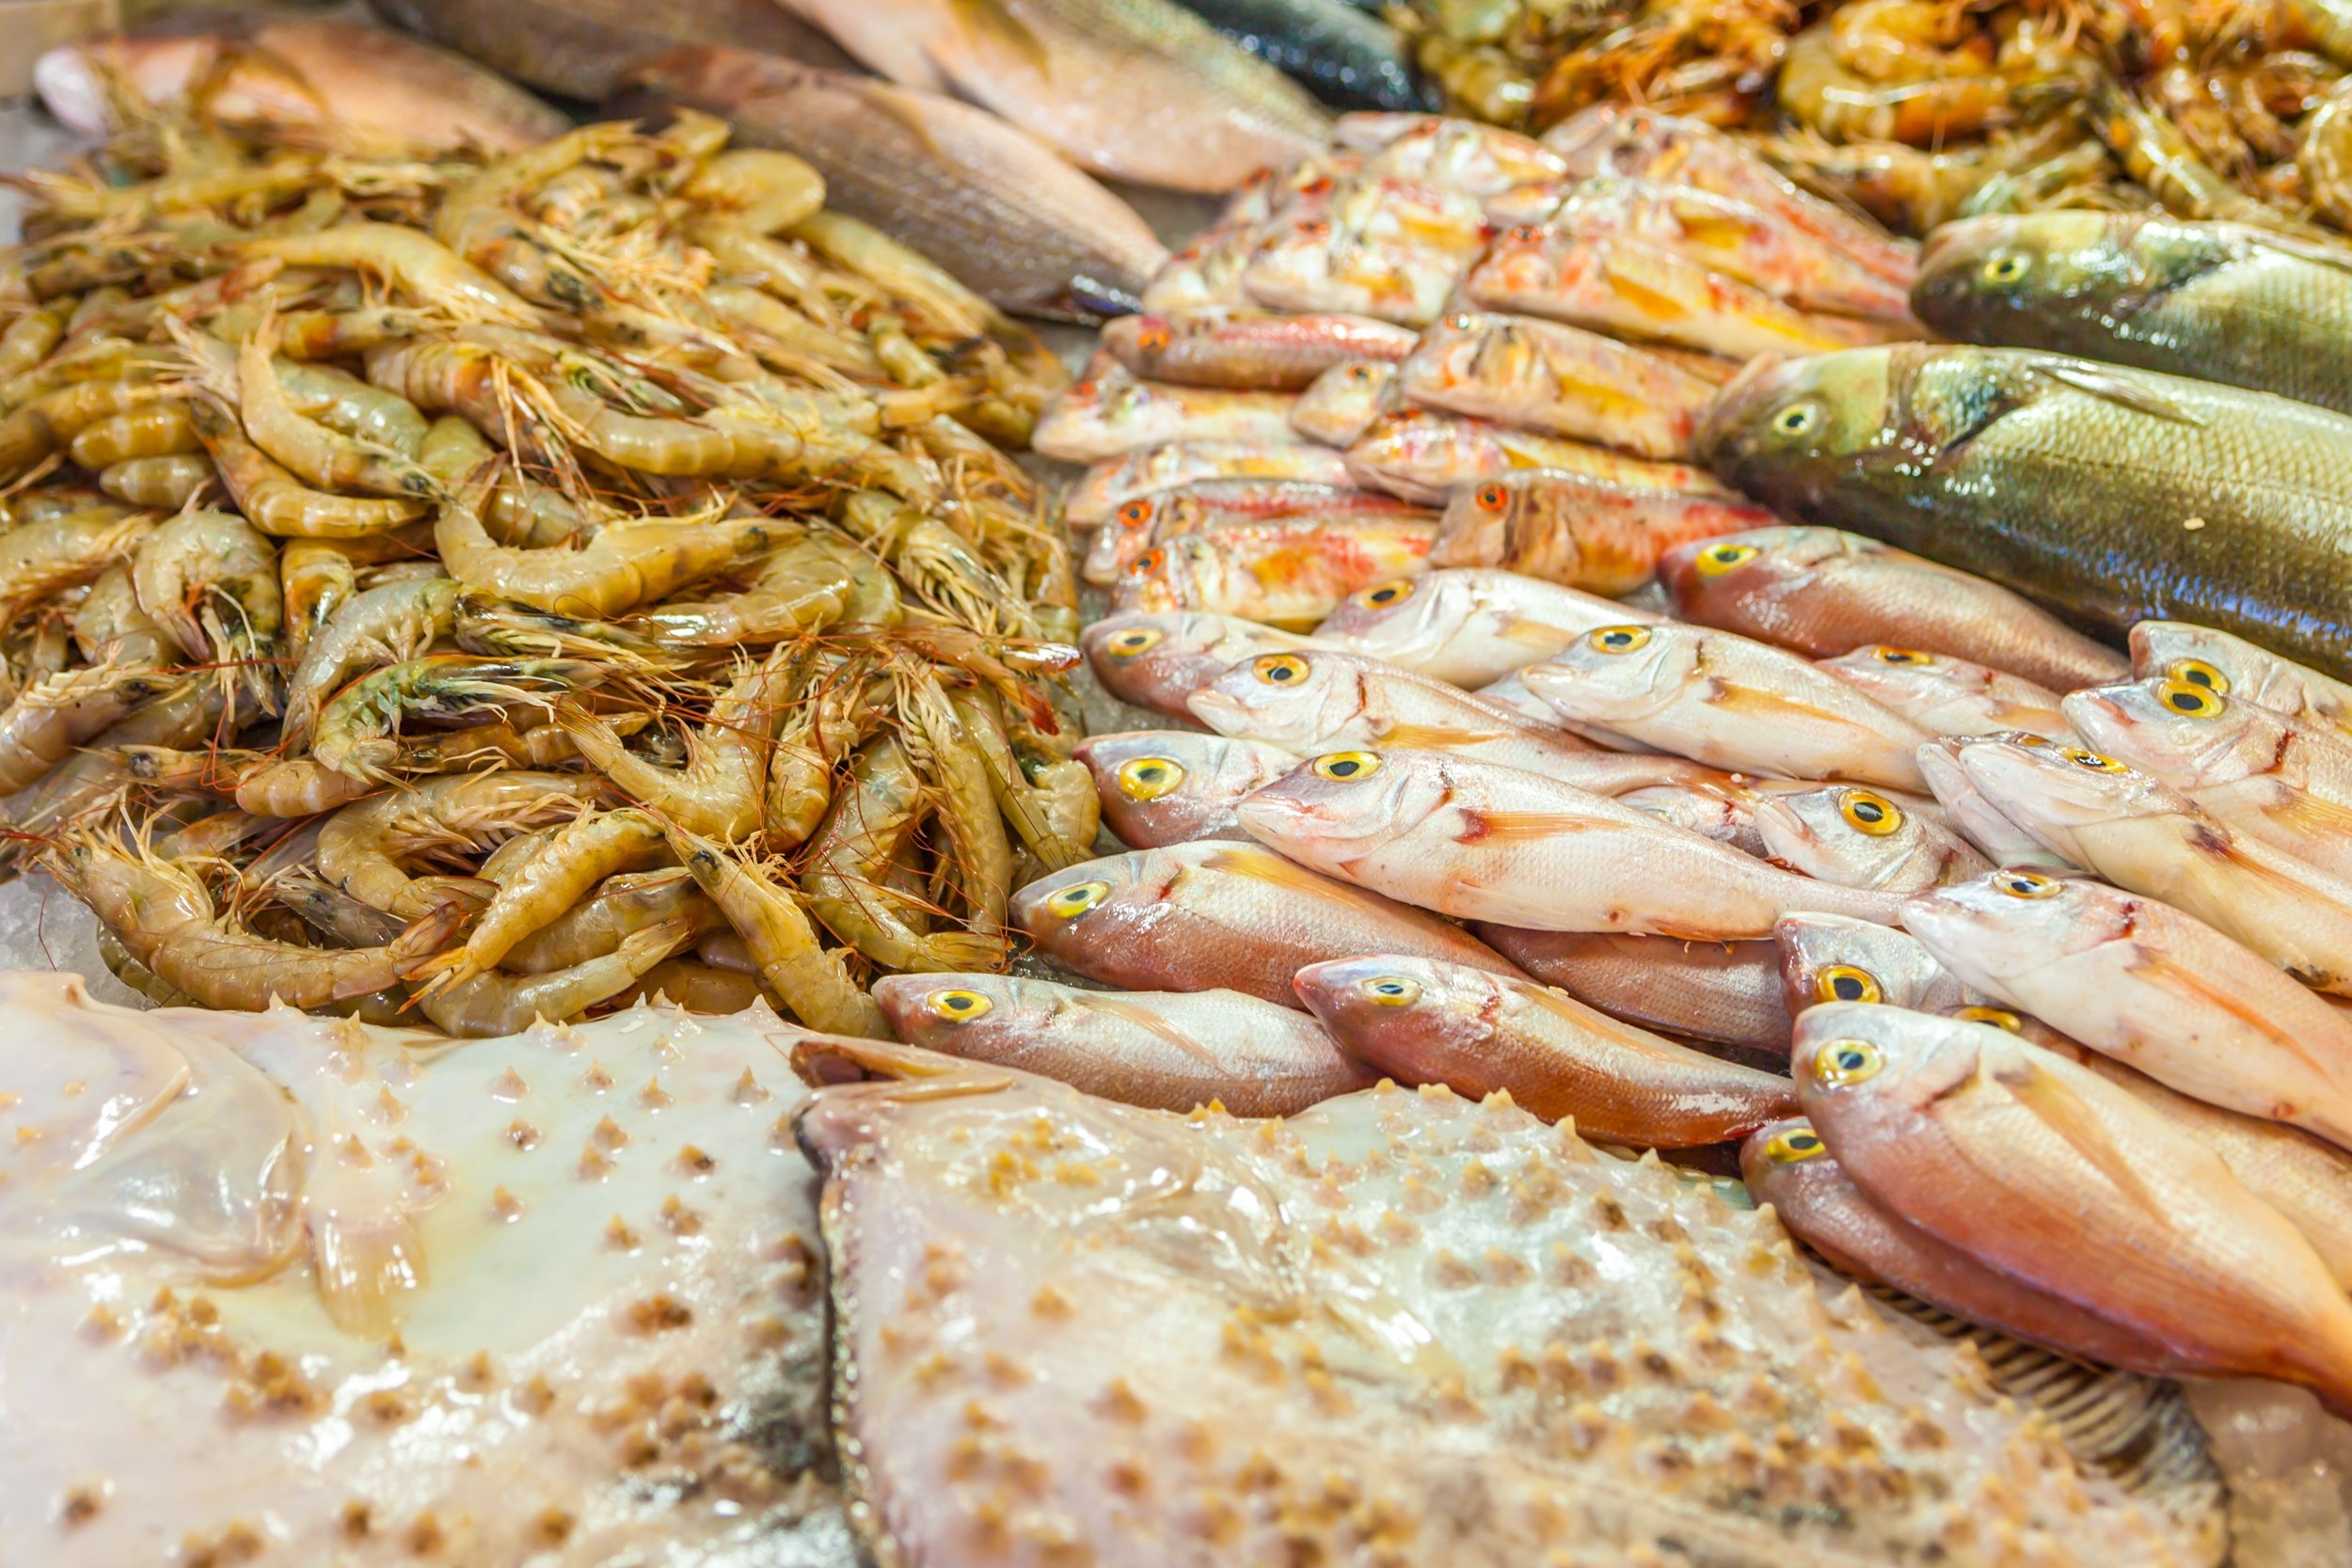 Fish and seafood at the Fish Market in Fethiye, Muğla, Turkey. (Shutterstock Photo)